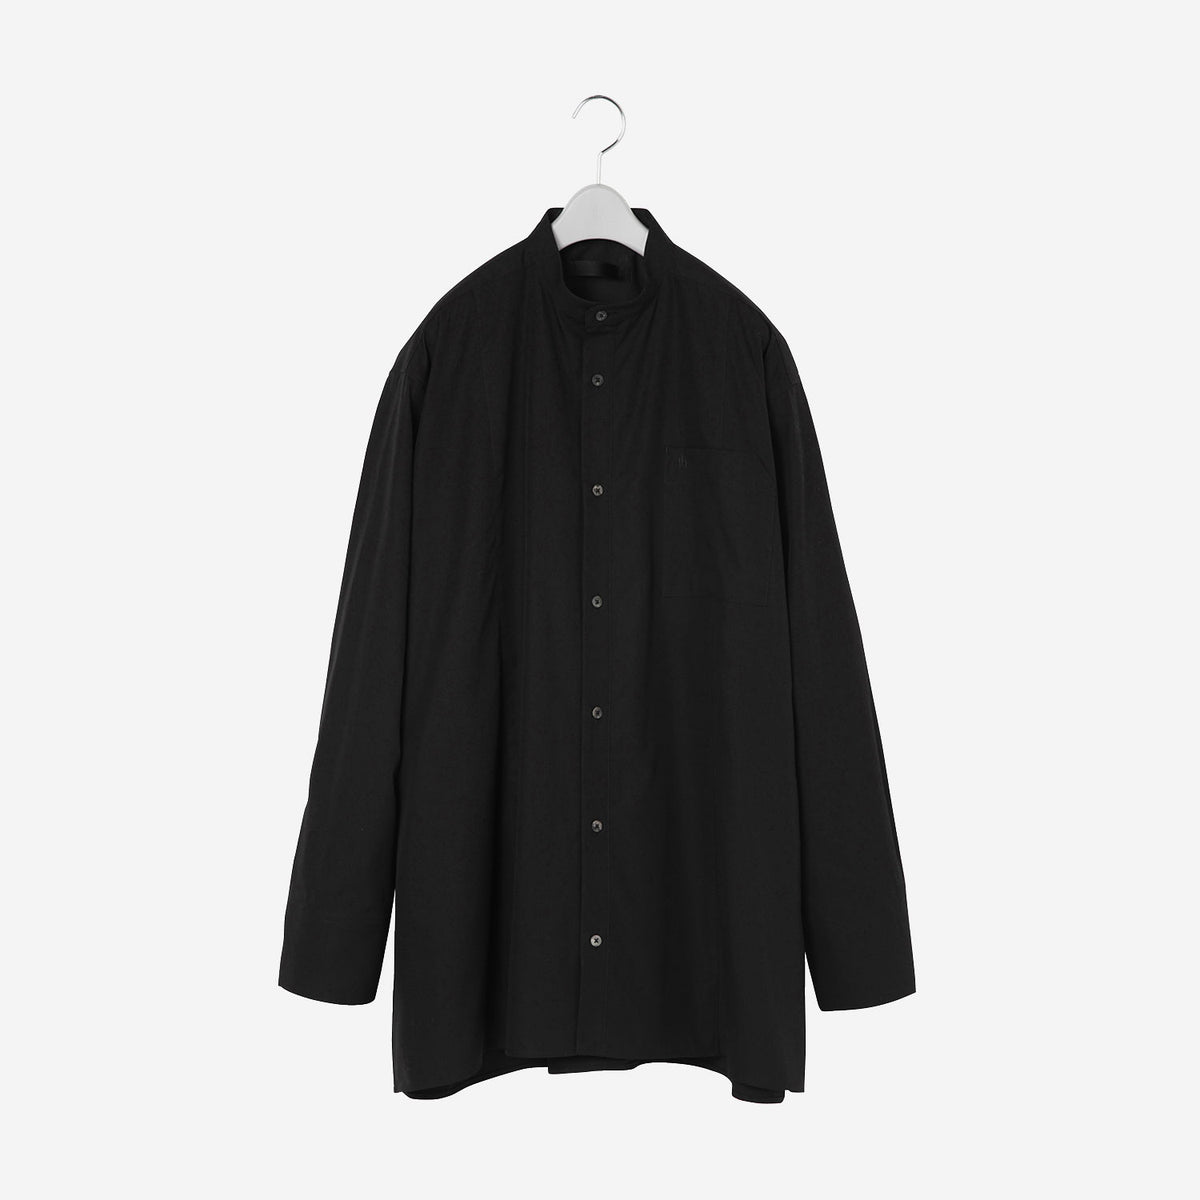 Oversized Band collar Shirt / black – th products